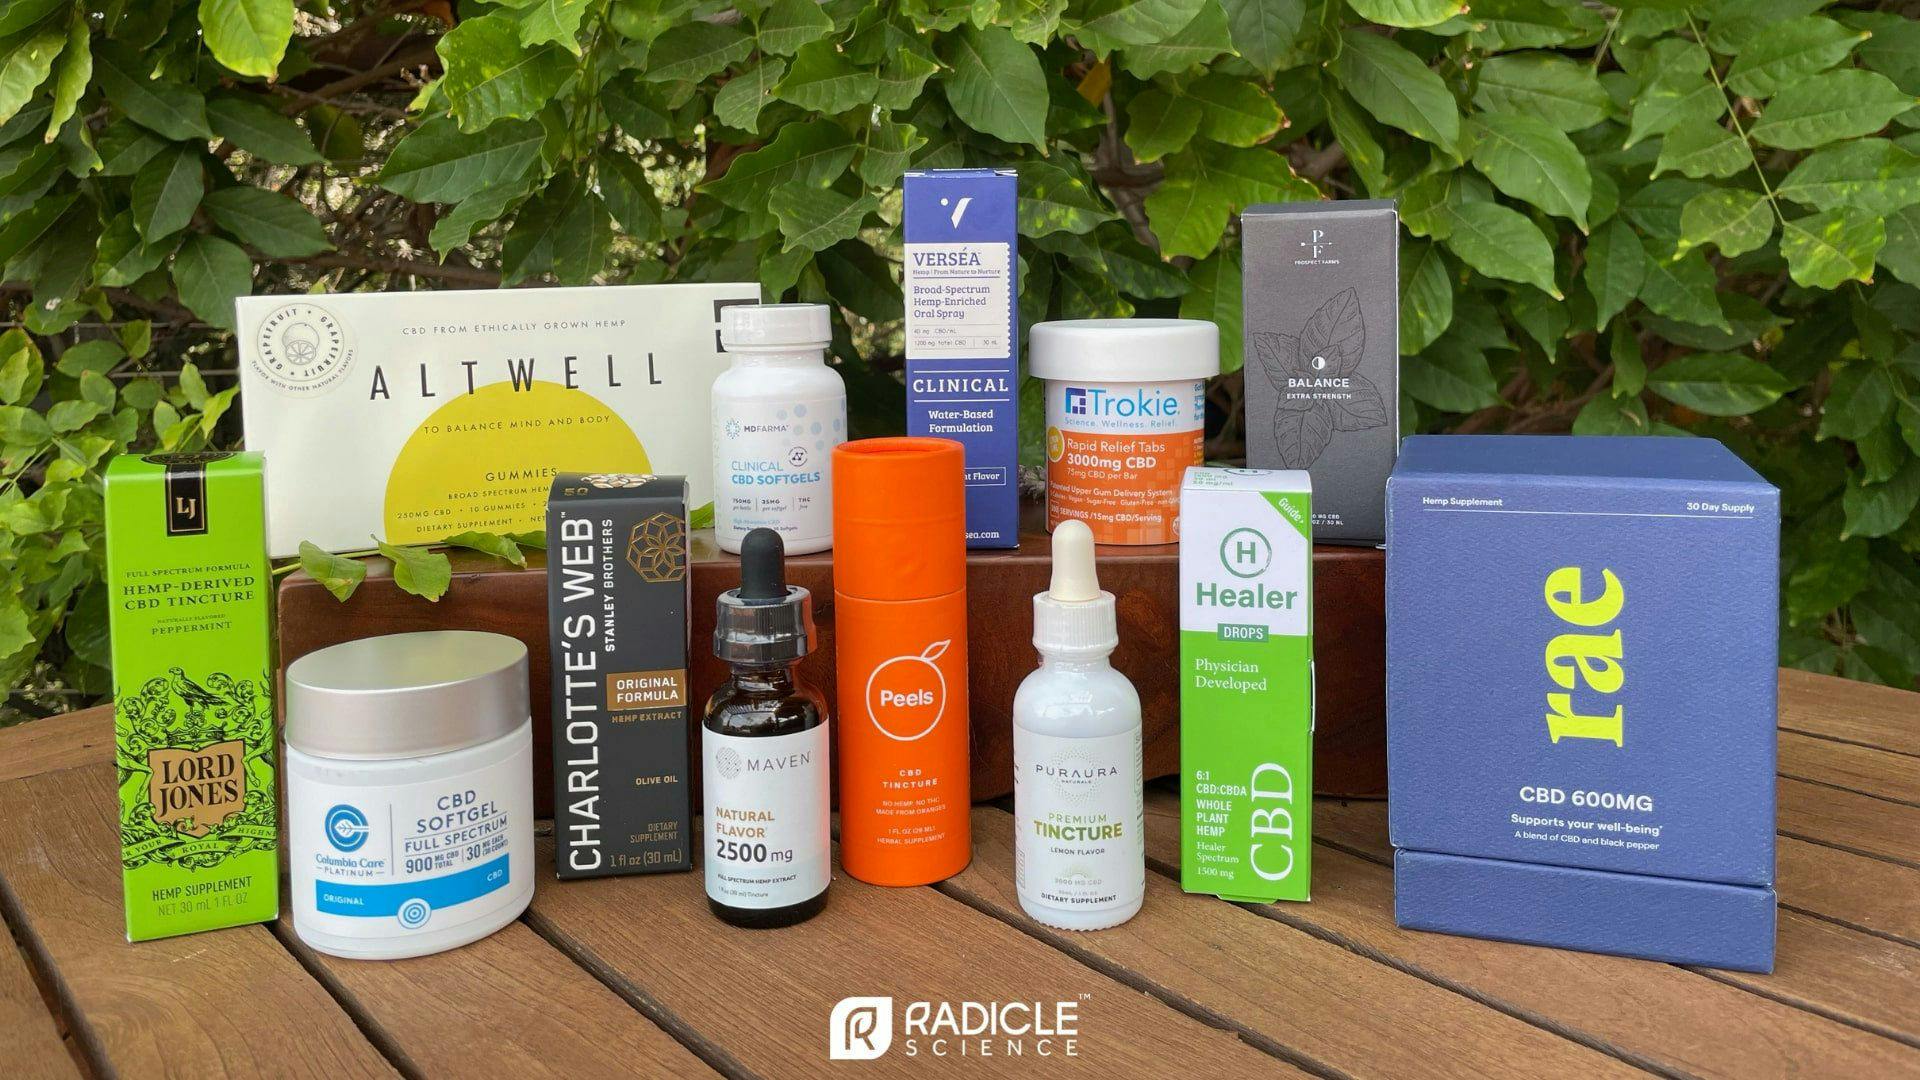 Radicle Science launches study evaluating effectiveness of CBD products